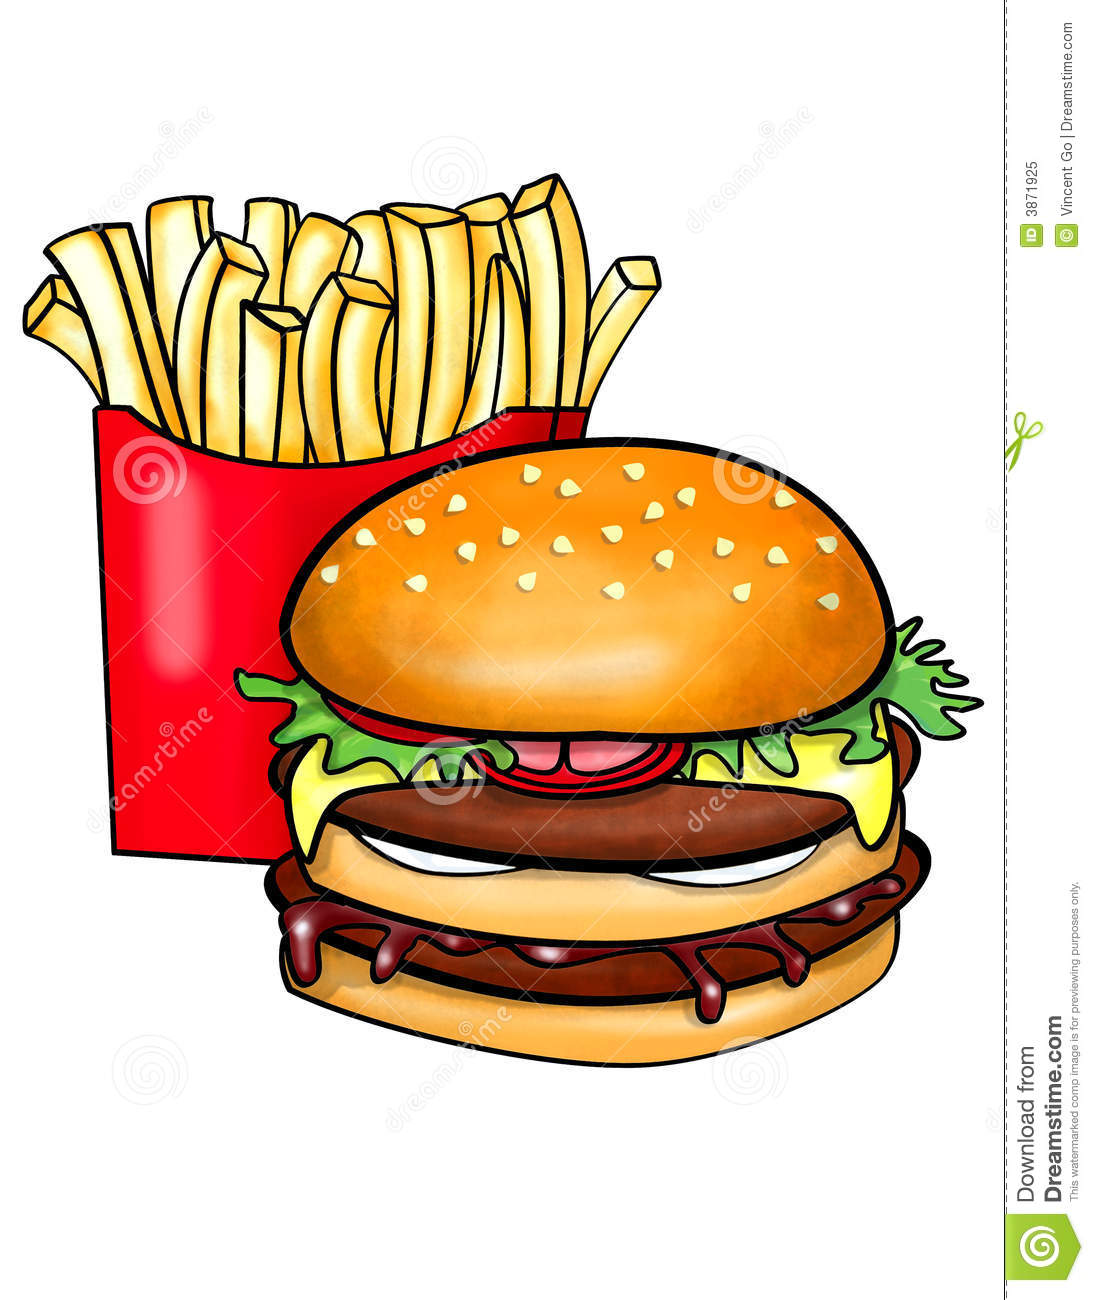 Double Decked Burger And Fries Royalty Free Stock Photo   Image    